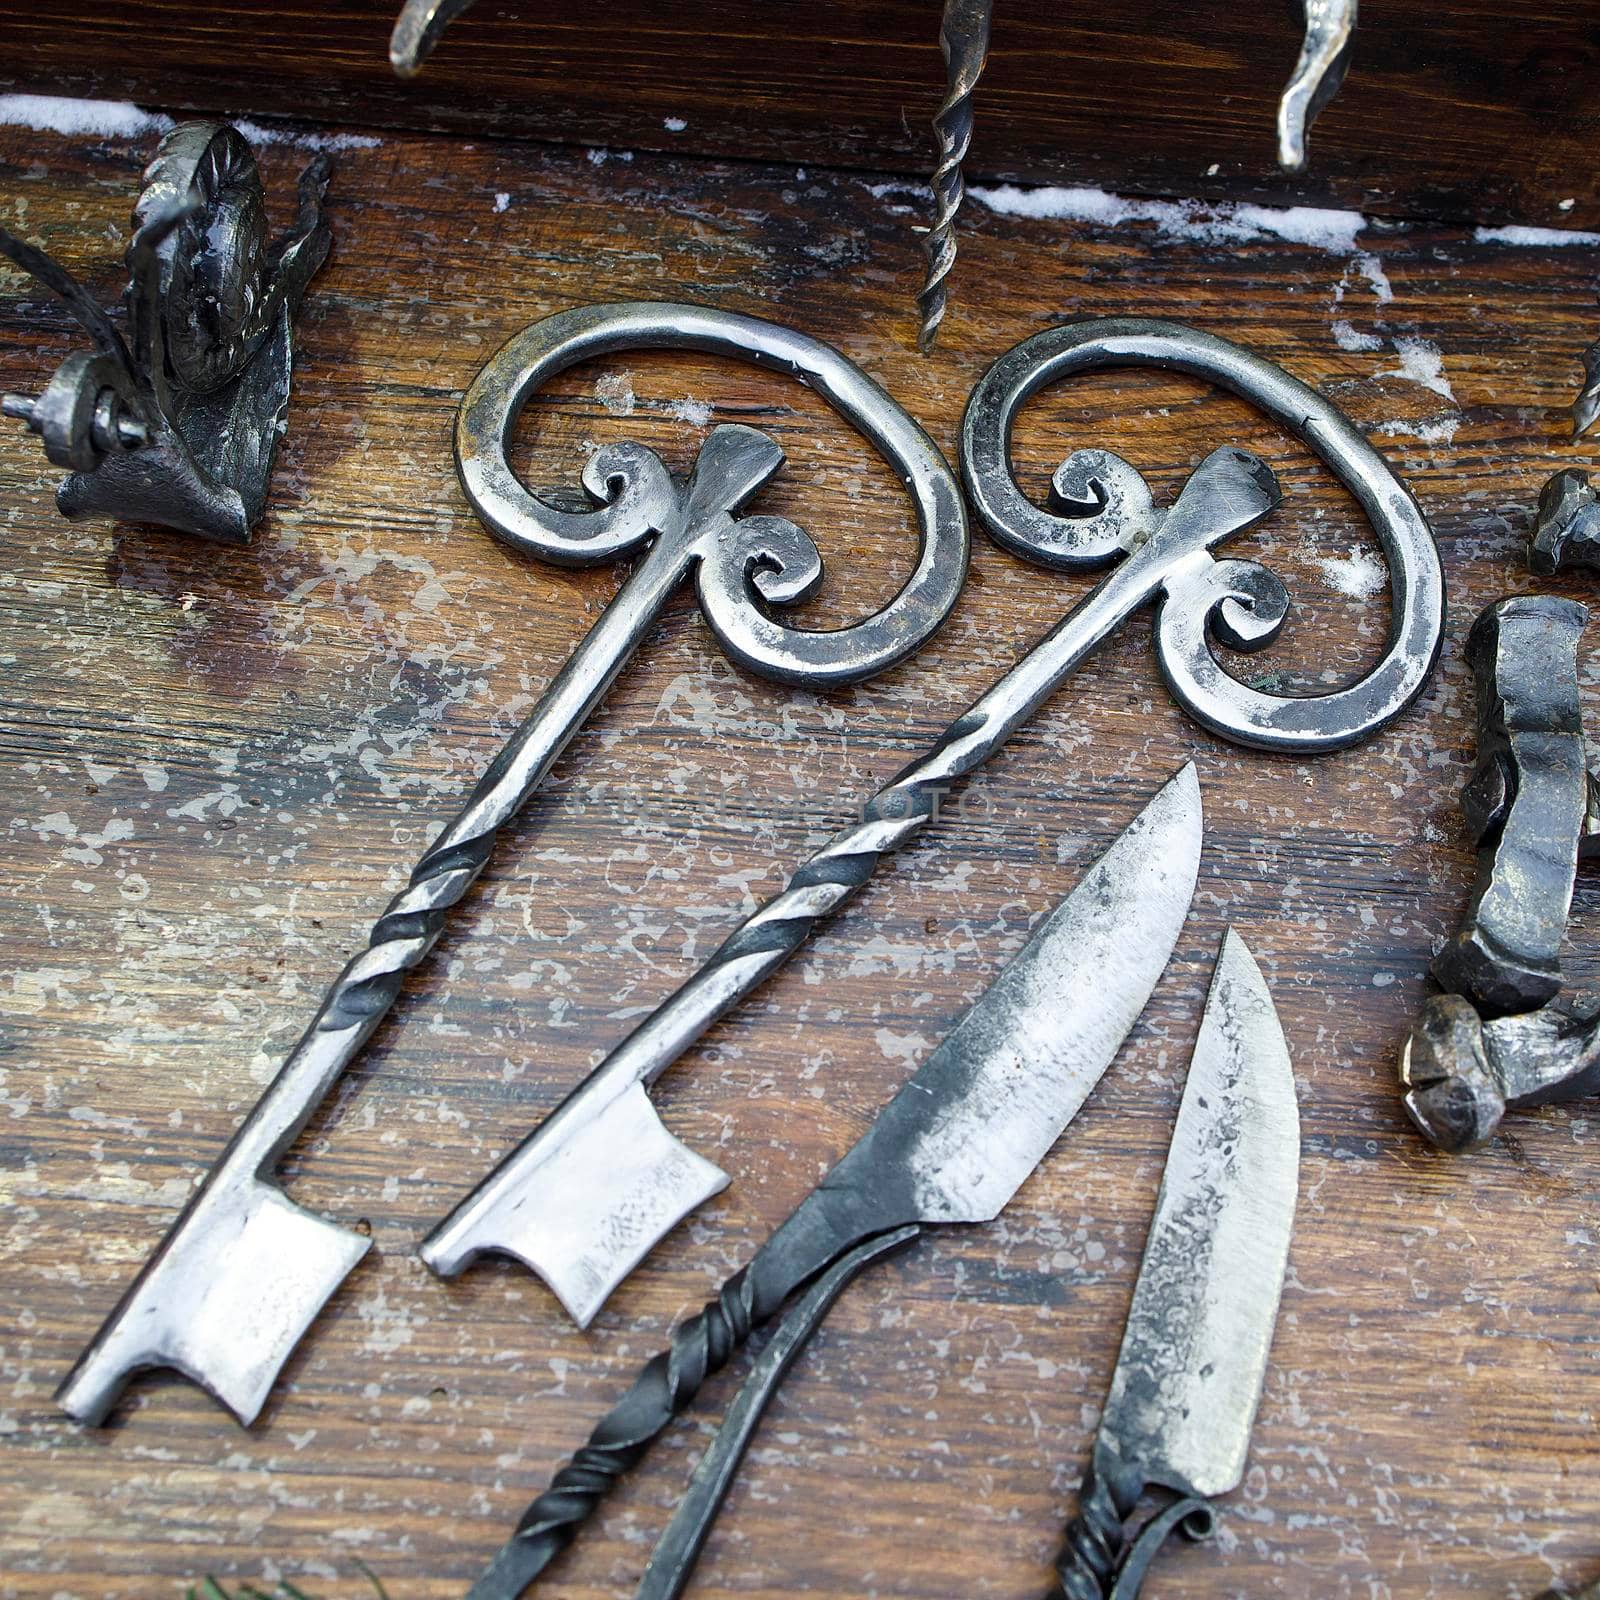 Forged keys and knives are on the counter for sale by elenarostunova